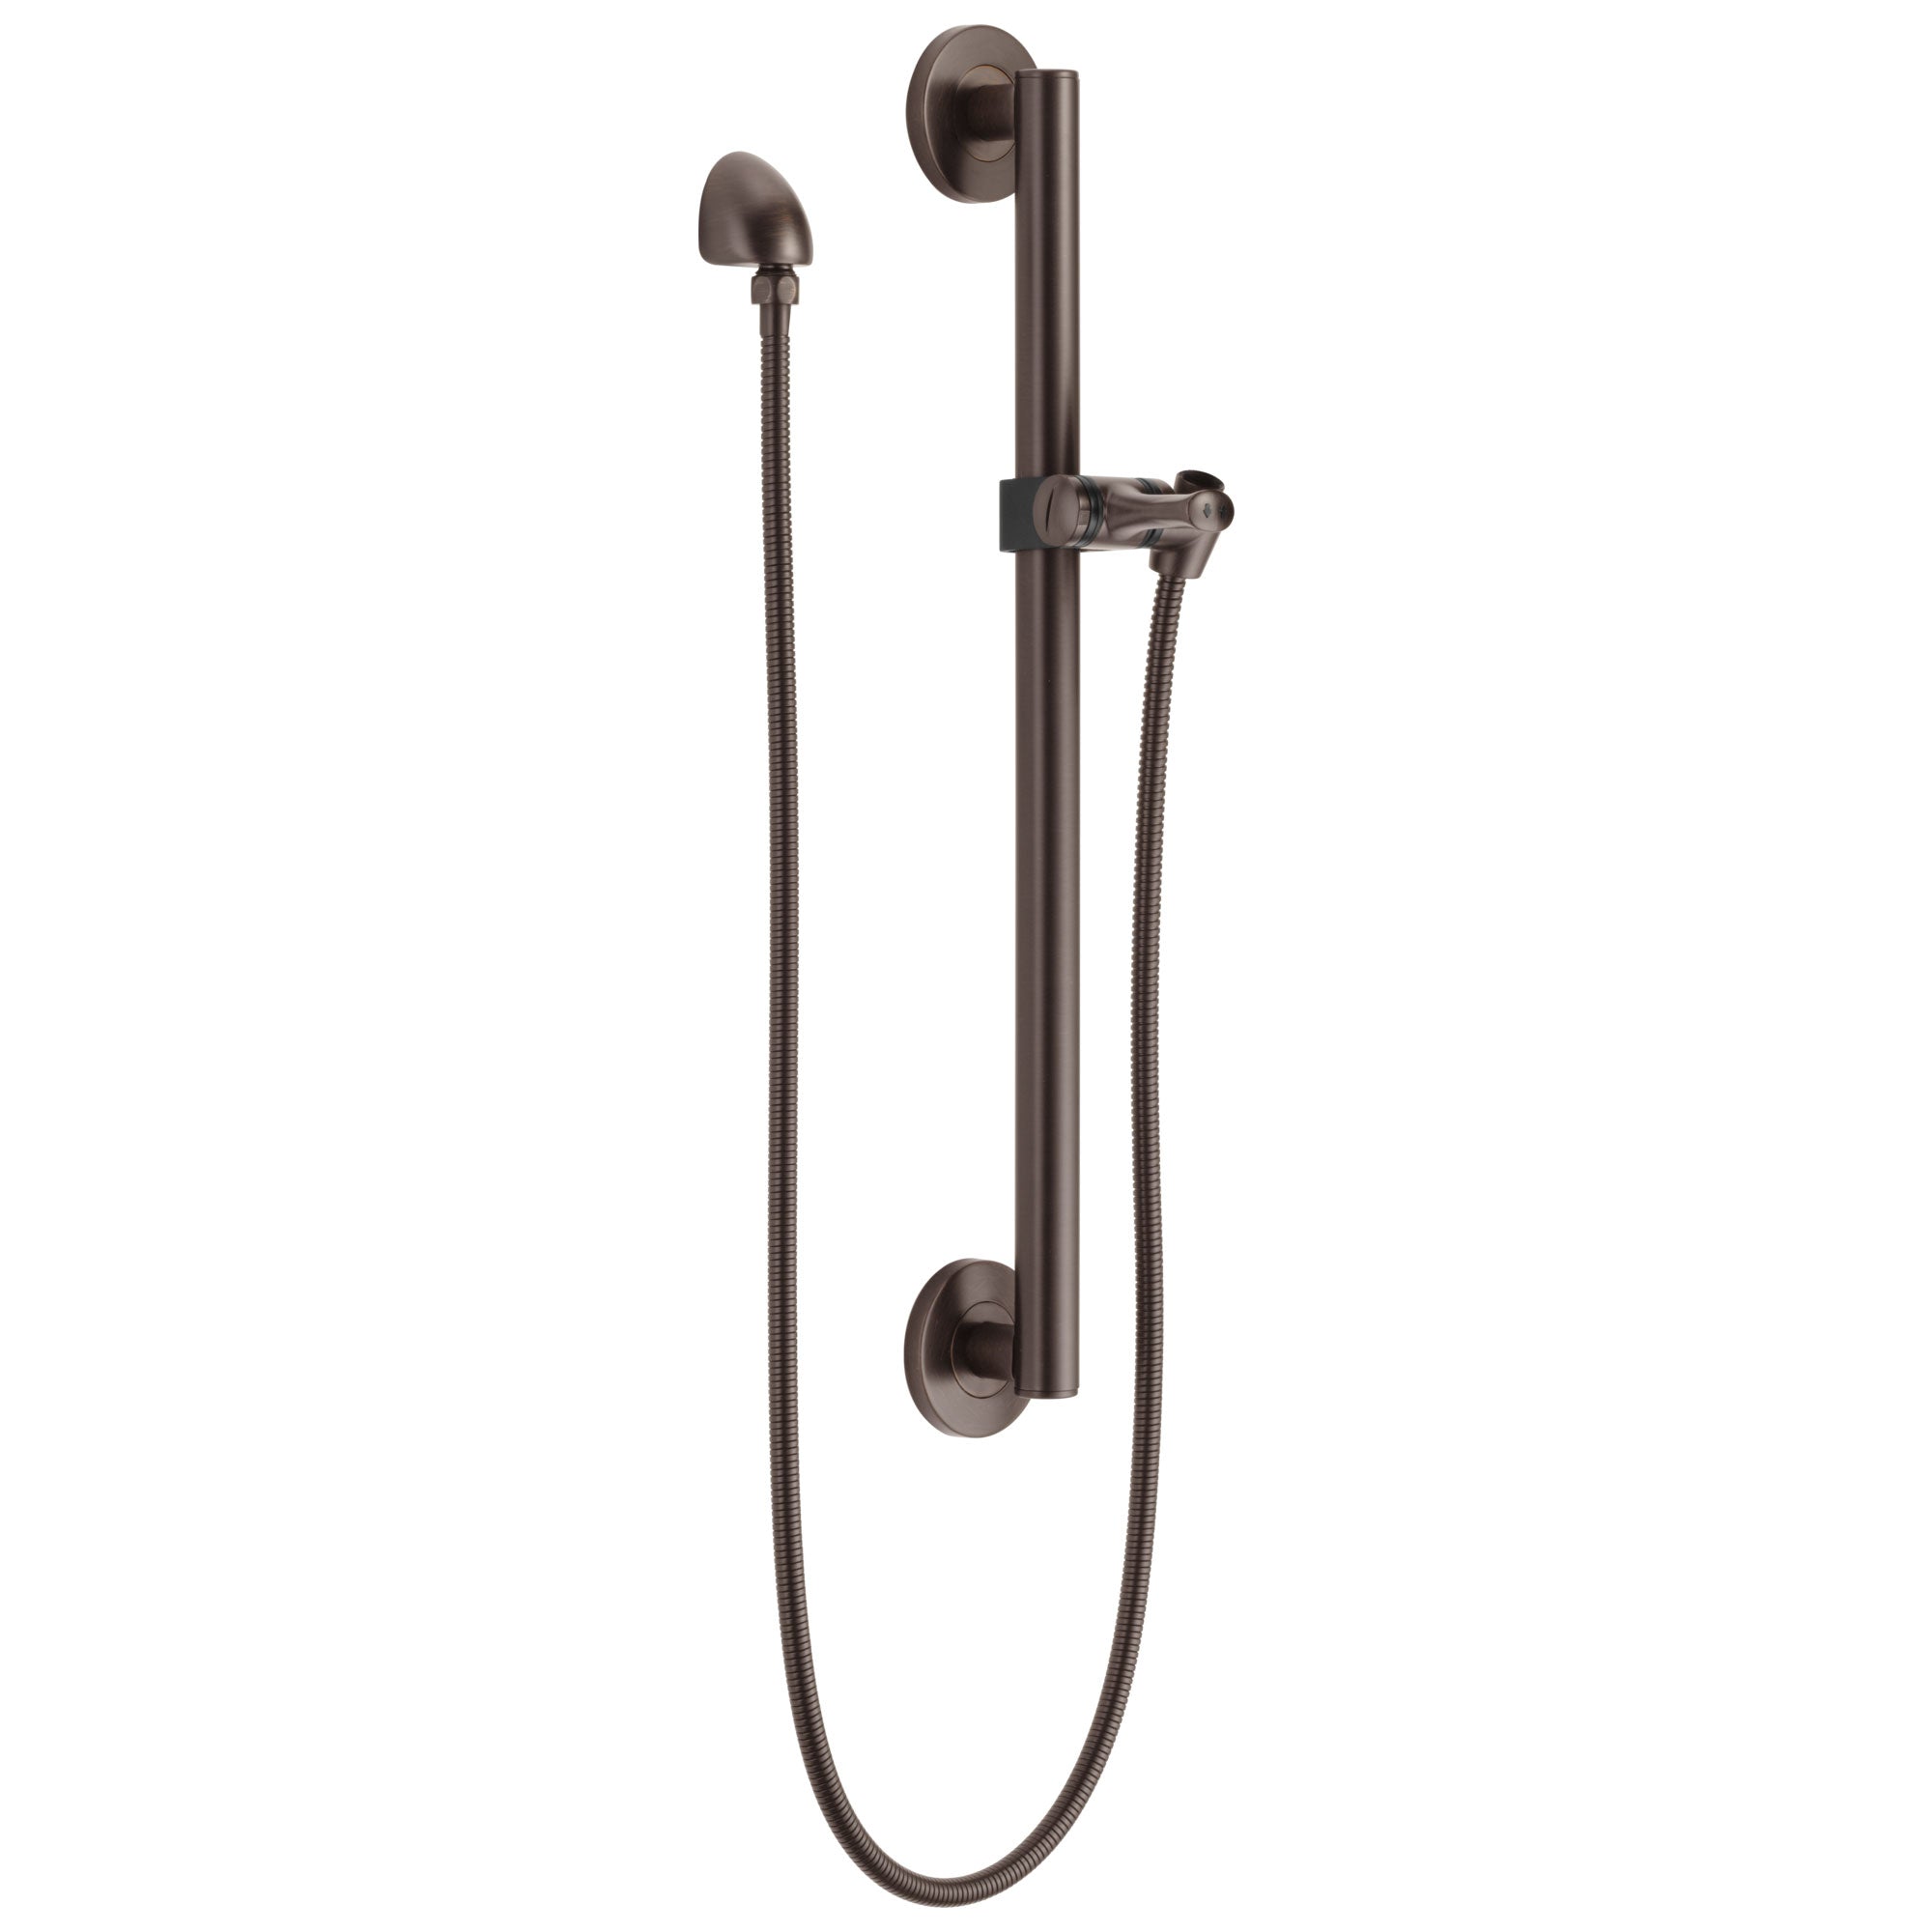 Delta Venetian Bronze Finish Modern Slide Bar / Grab Bar Assembly with Adjustable Mounting Bracket, Wall Elbow, and Hose (Requires Hand Spray) D51600RB